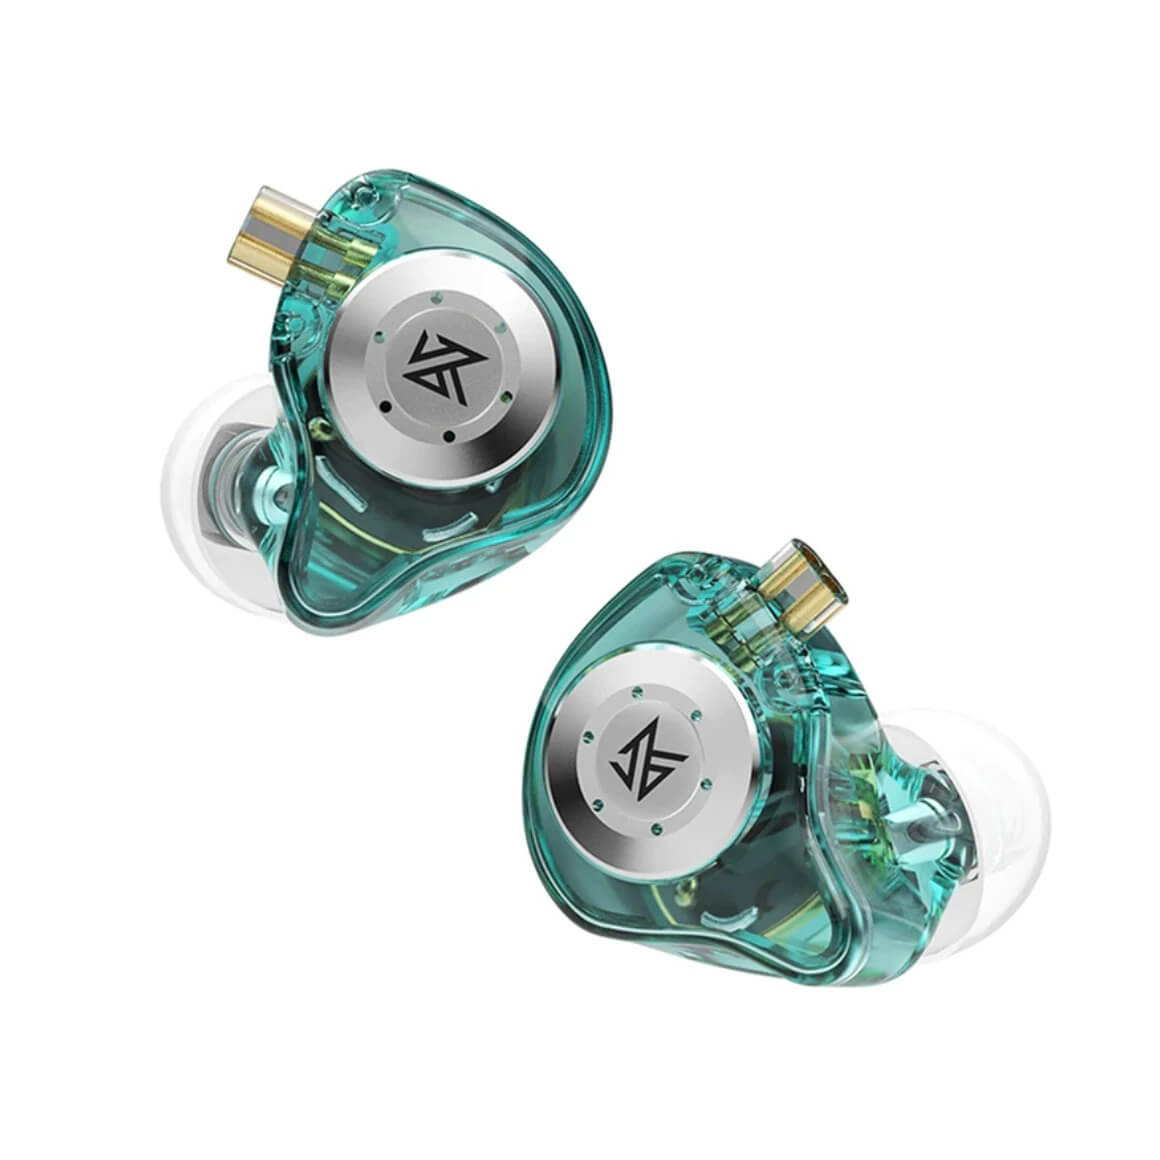 Buy Knowledge Zenith EDX Pro Earphone at HiFiNage in India with warranty.